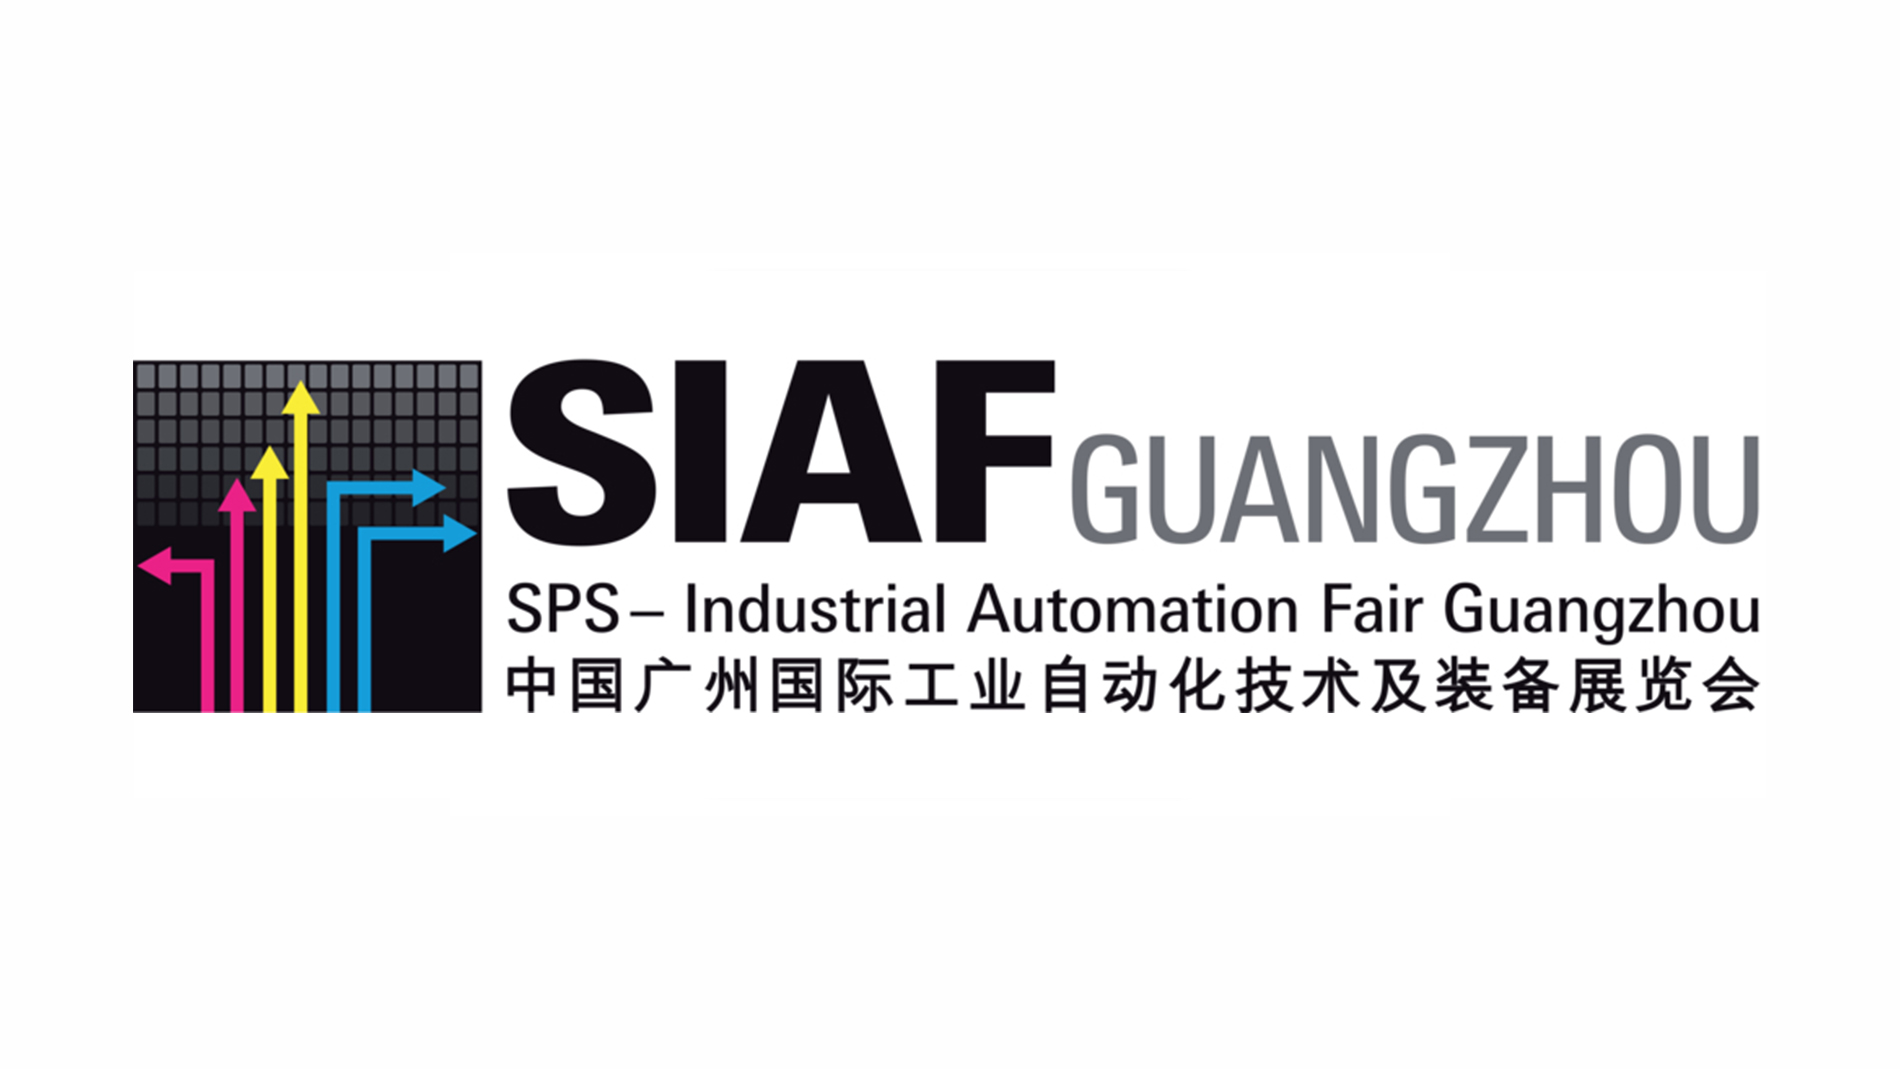 SPS Industrial Automation Fair Guangzhou